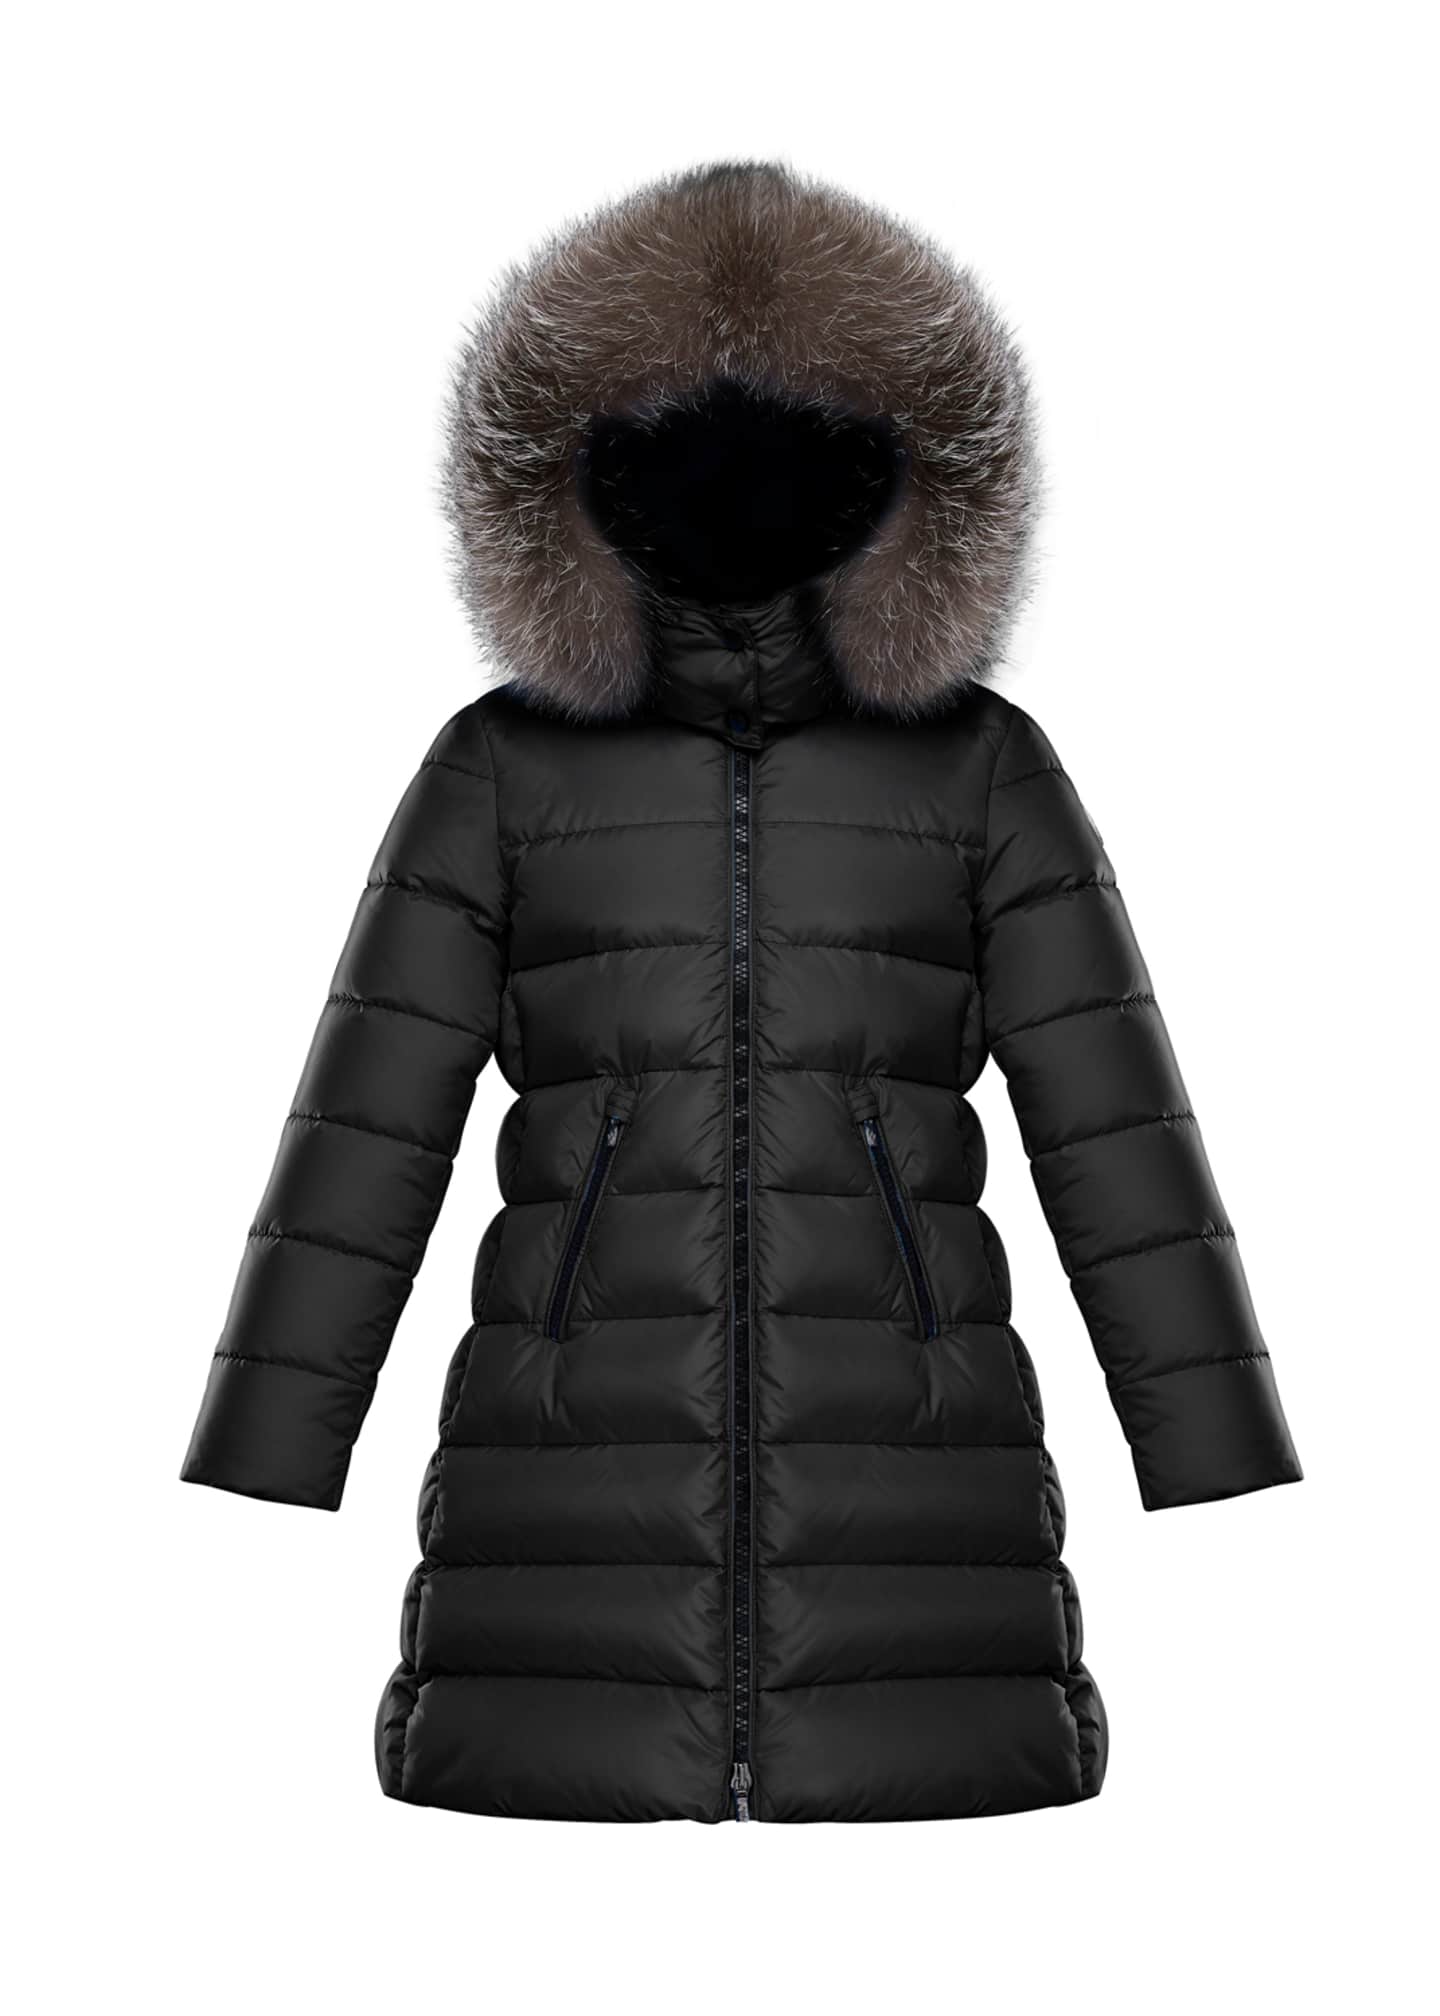 Moncler Moka Quilted Puffer Coat w/ Hood, Size 8-14